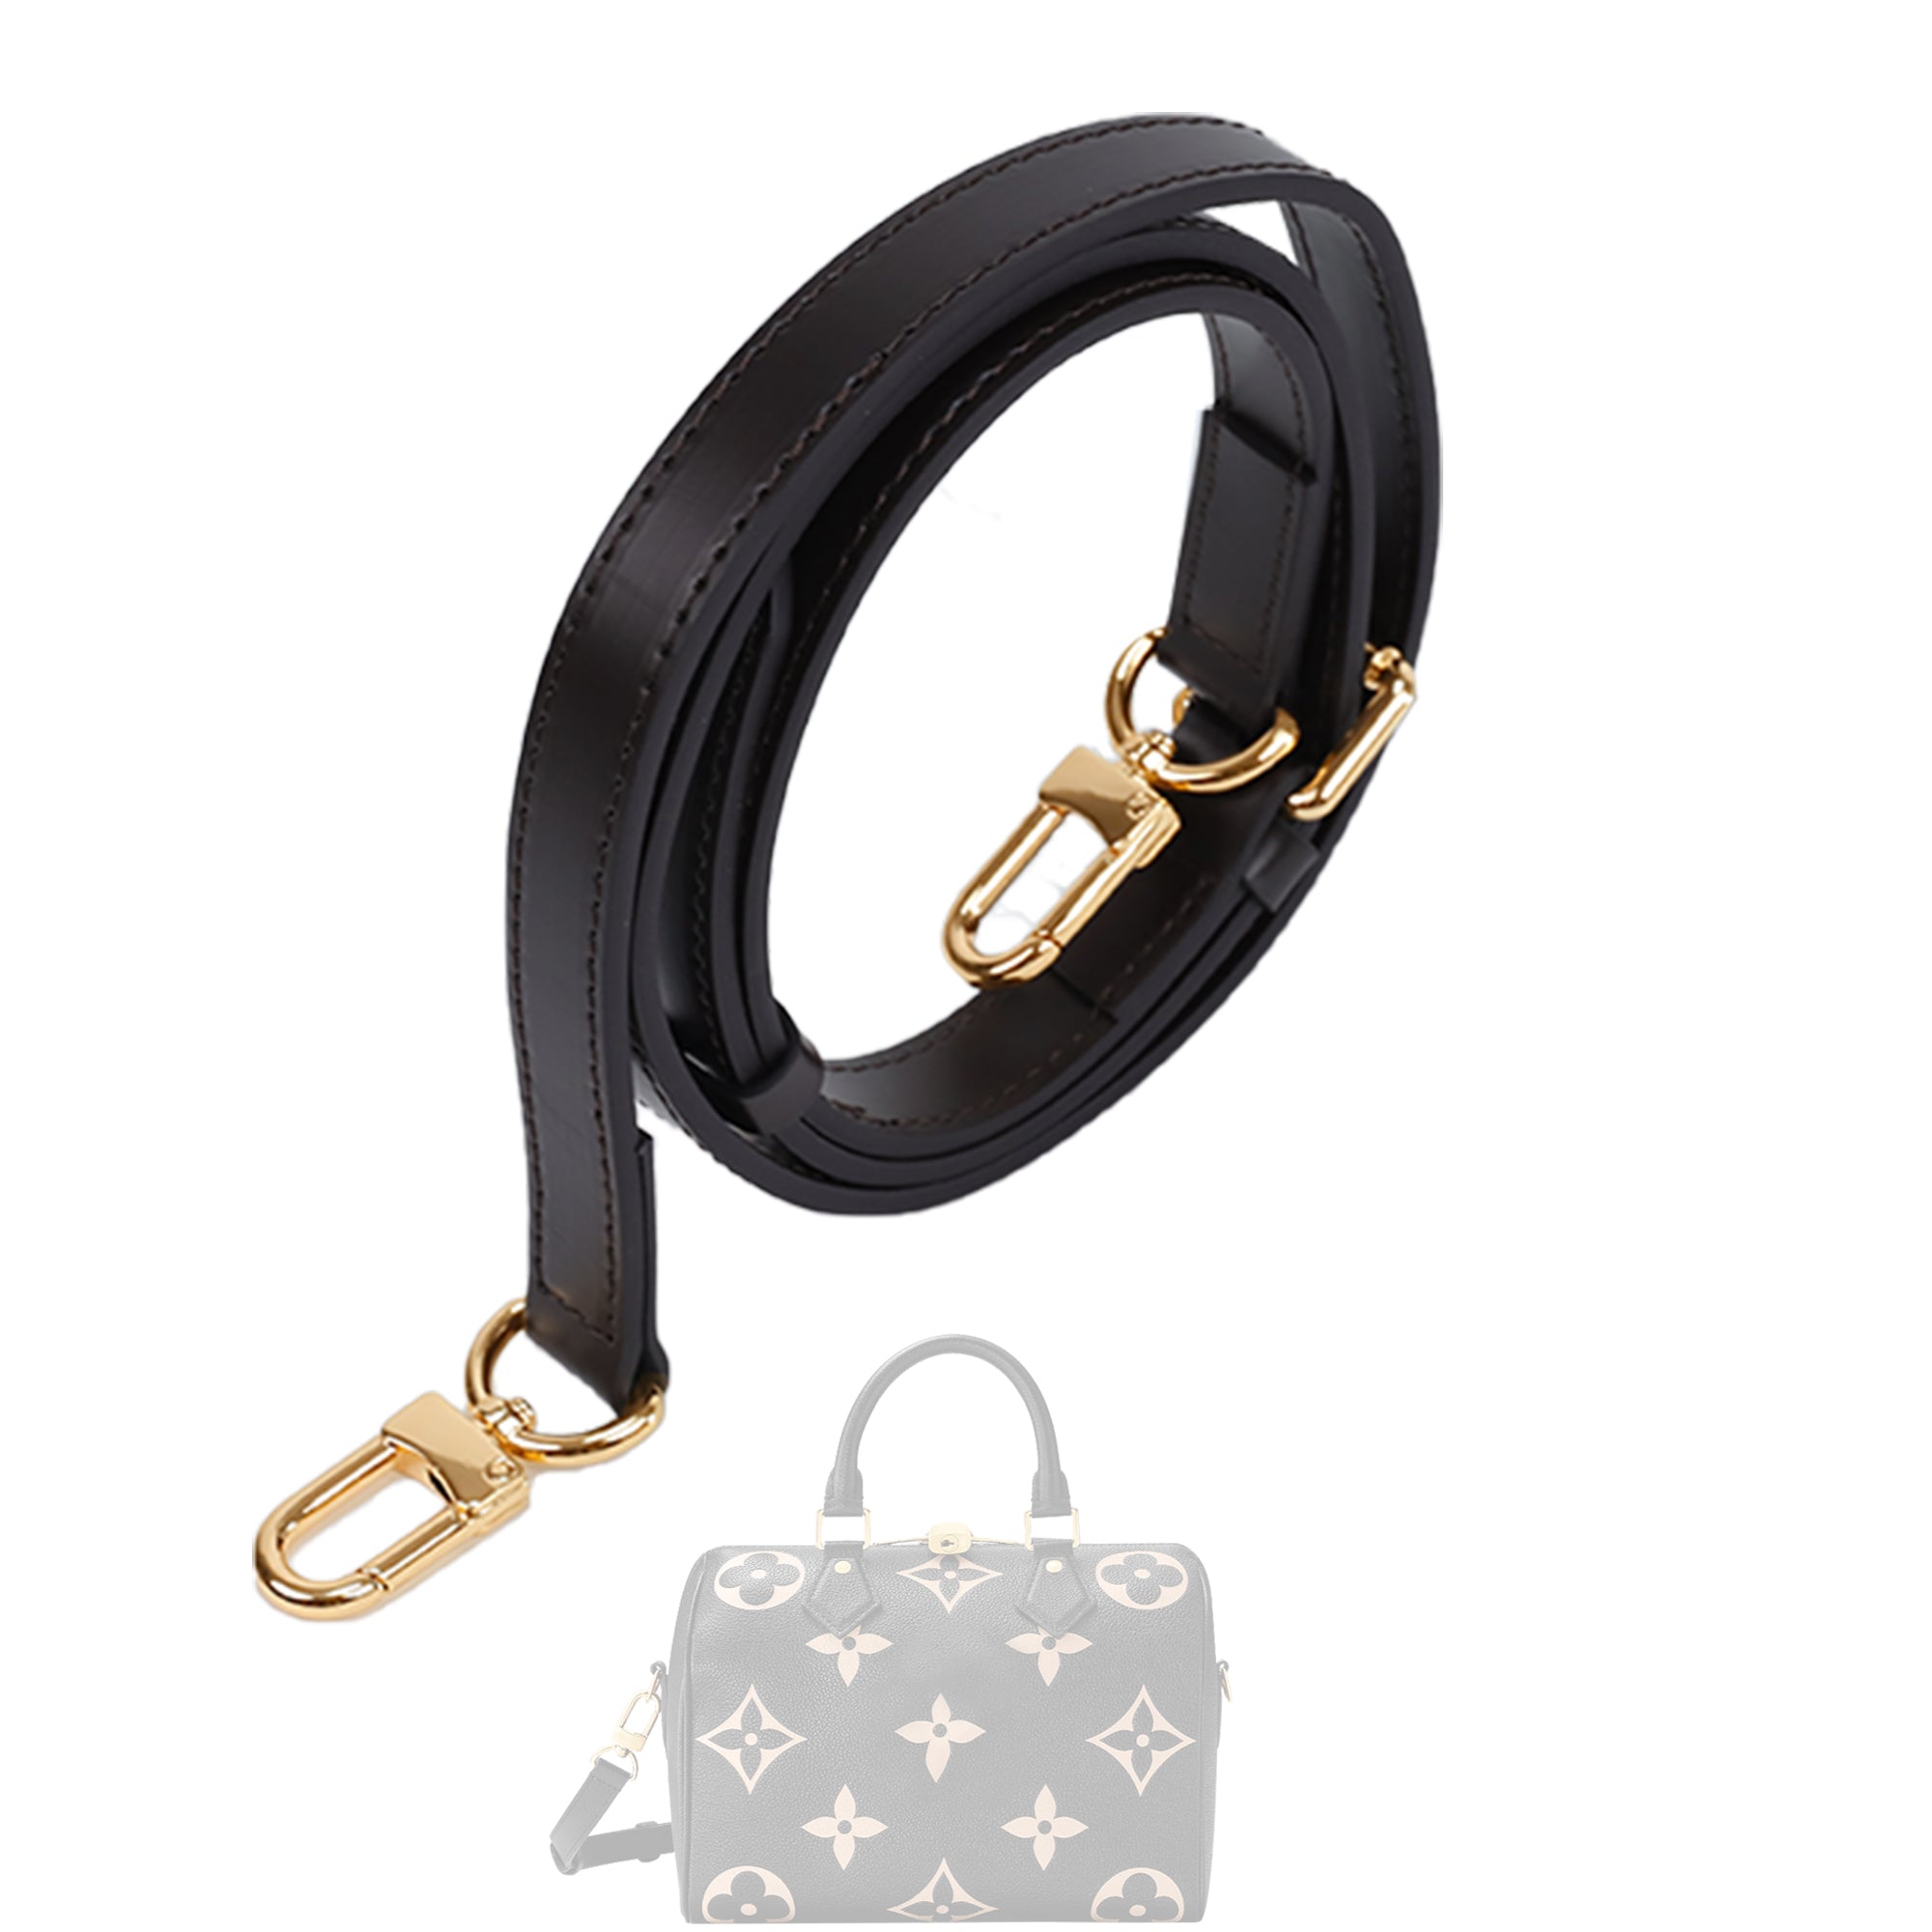 Vachetta Leather Replacement Crossbody Bag Strap,Fit for LV Speedy 25 30 35